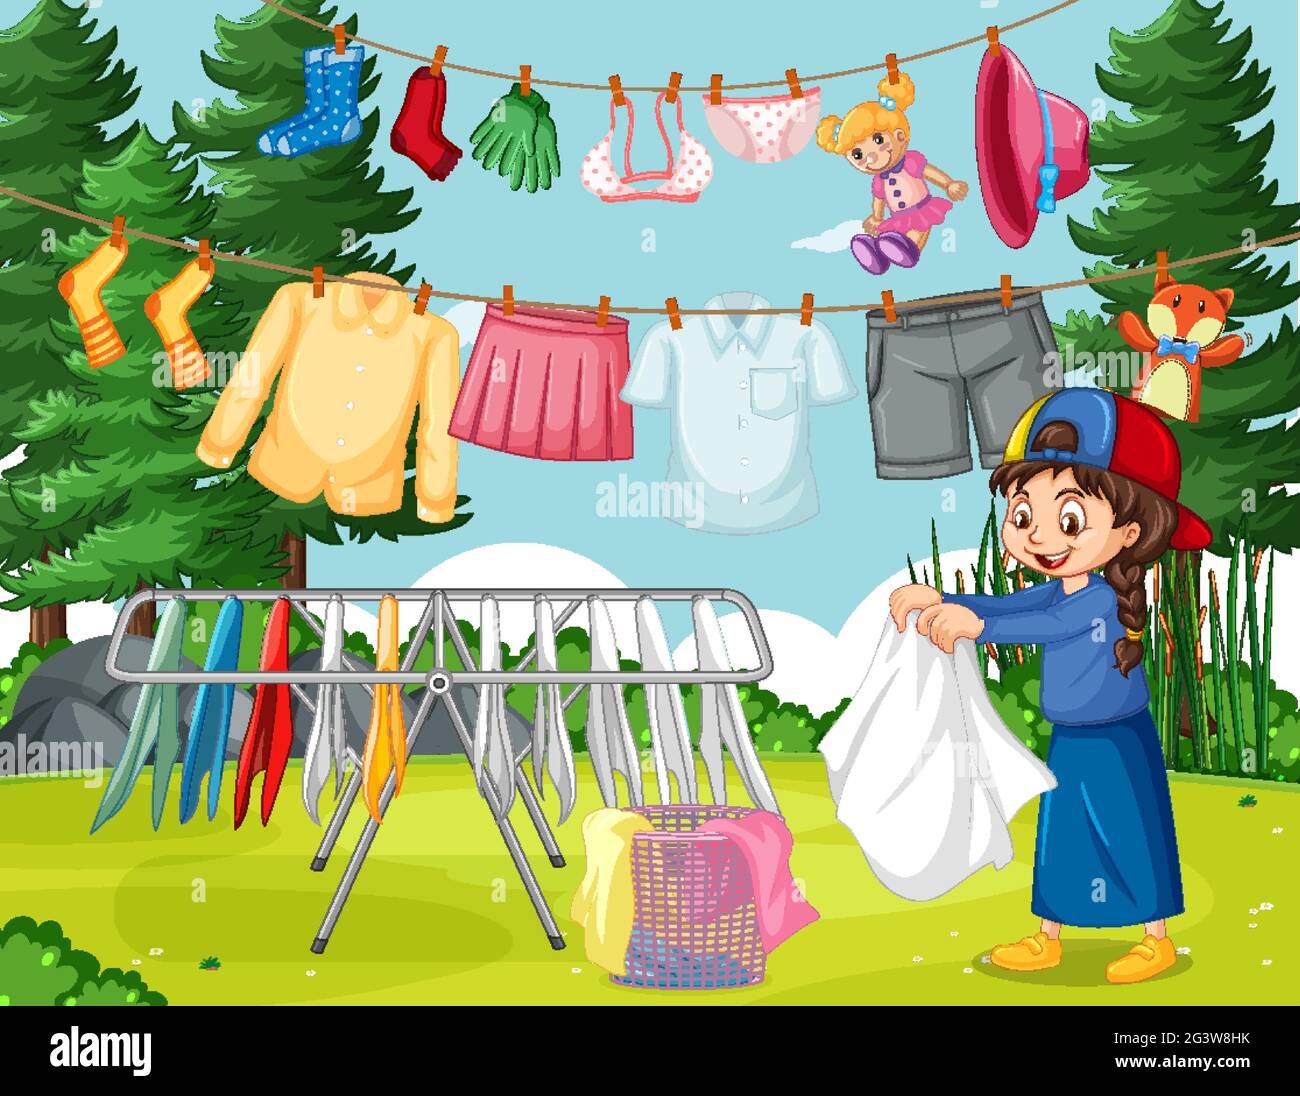 Outdoor scene with a girl hanging clothes on clotheslines illustration Stock Vector